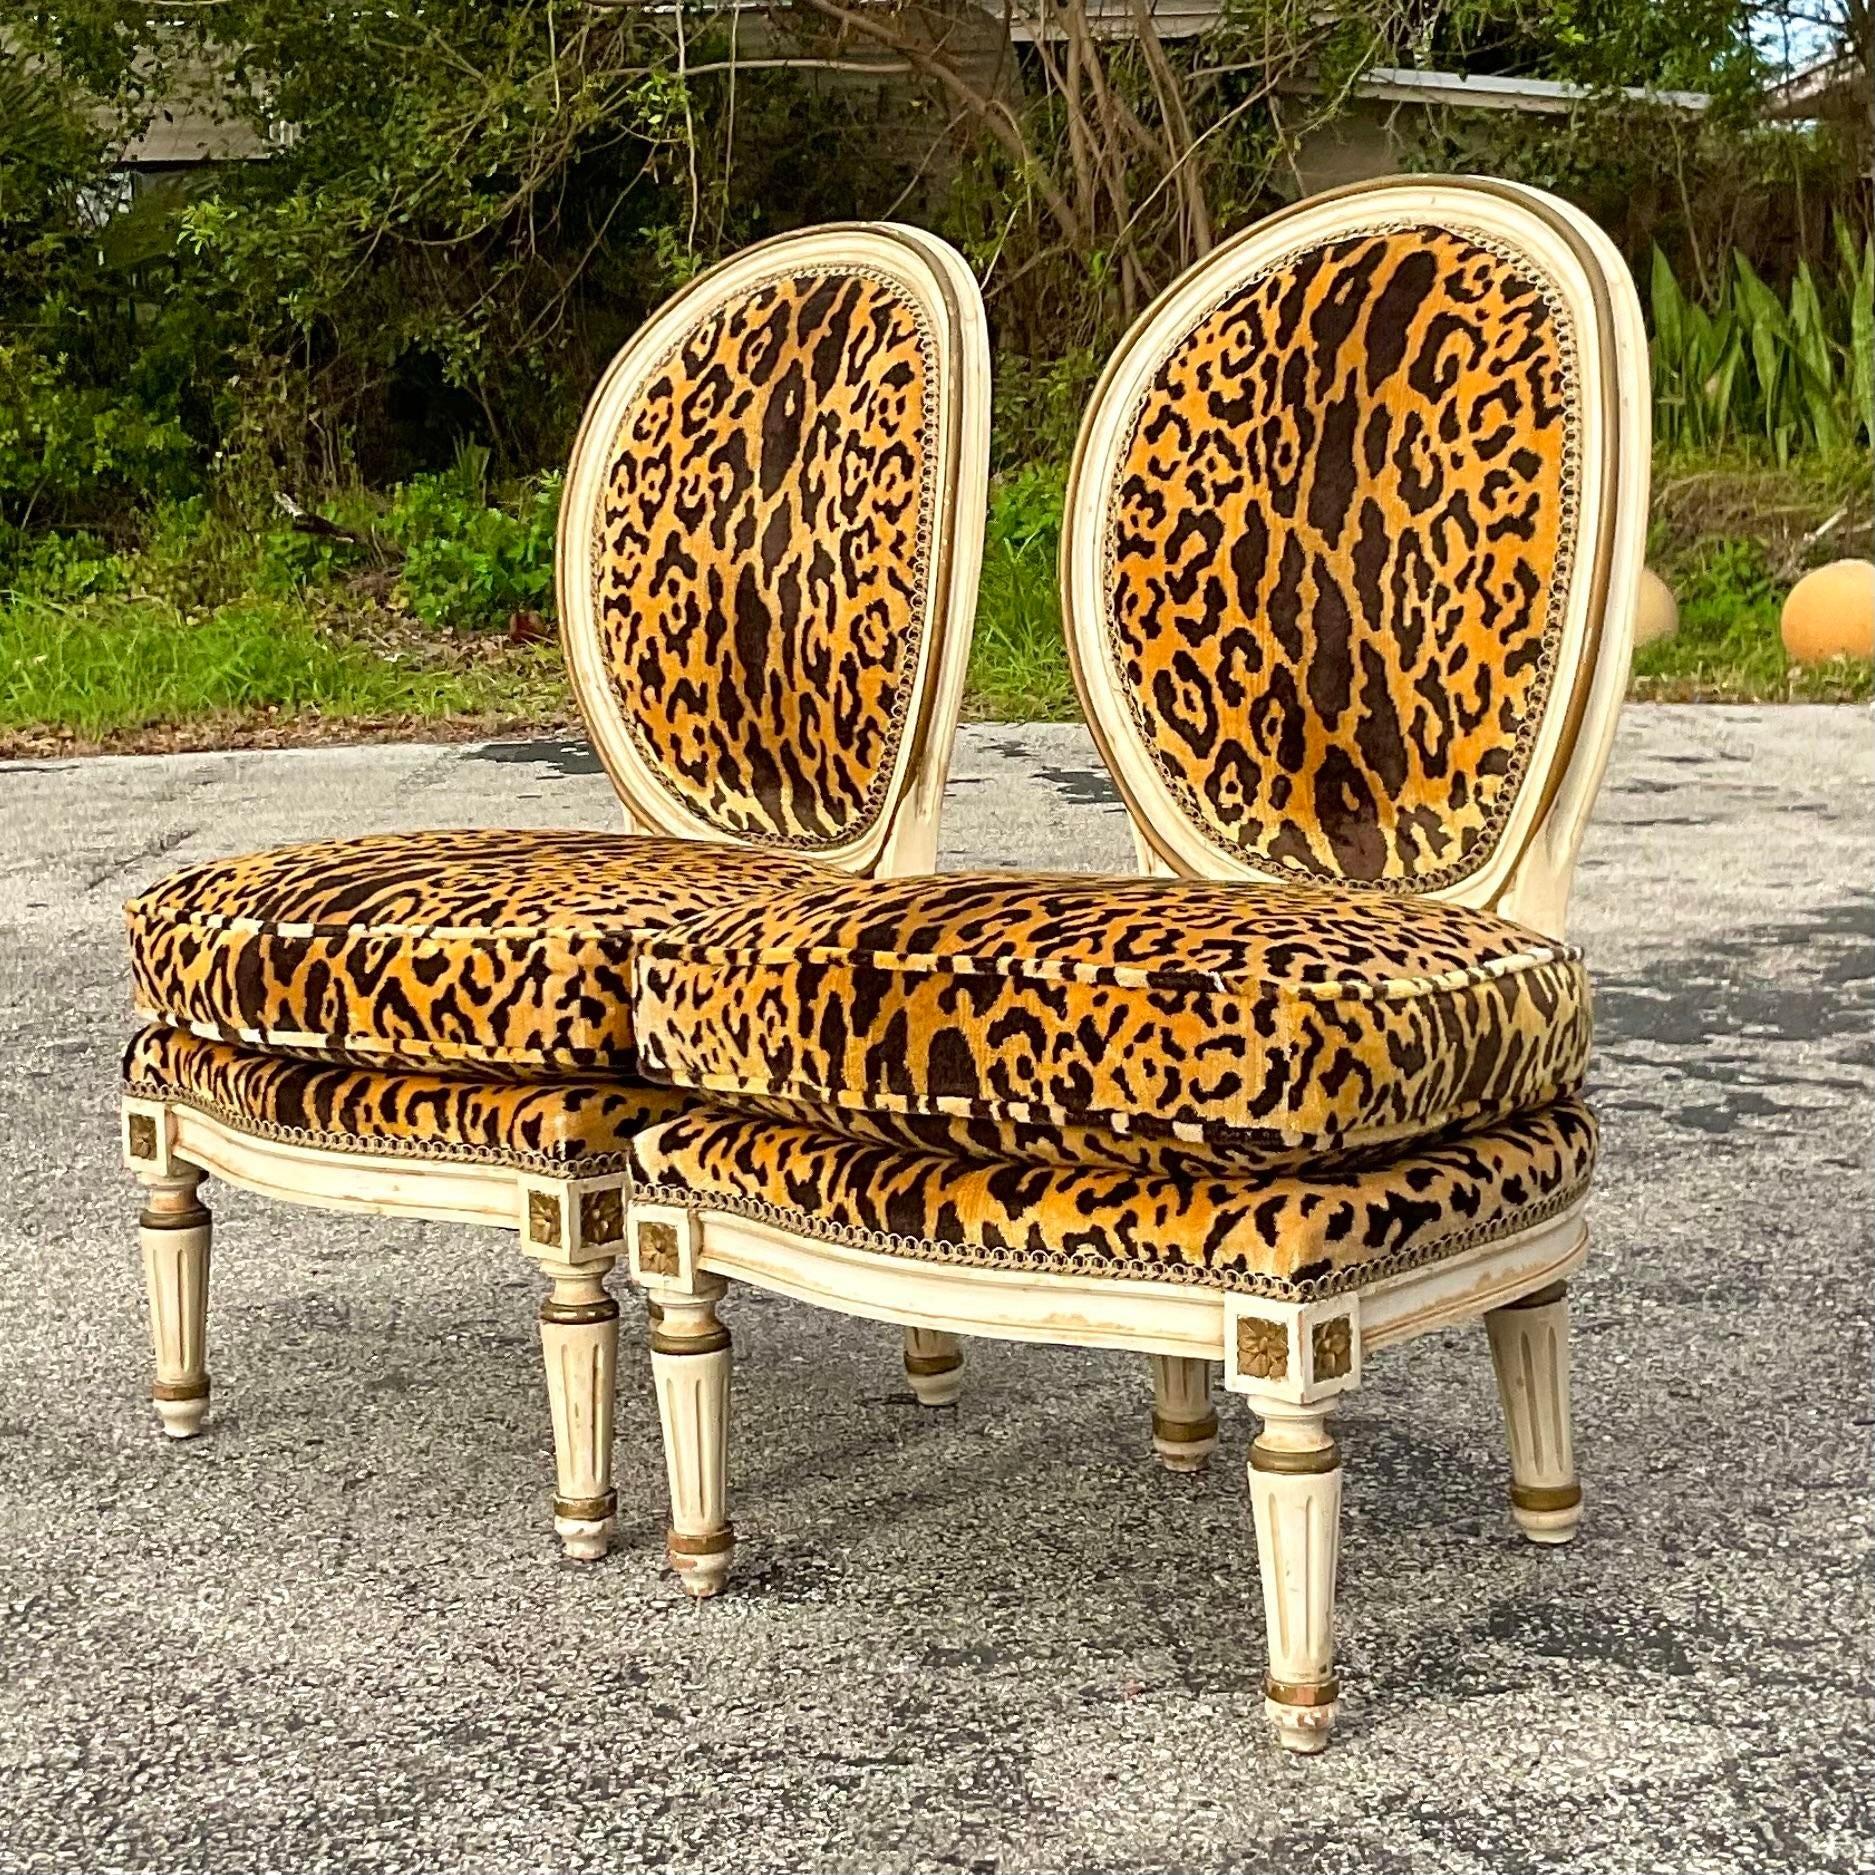 Upholstery Vintage Regency Louis XI Style Leopard Slipper Chairs - a Pair